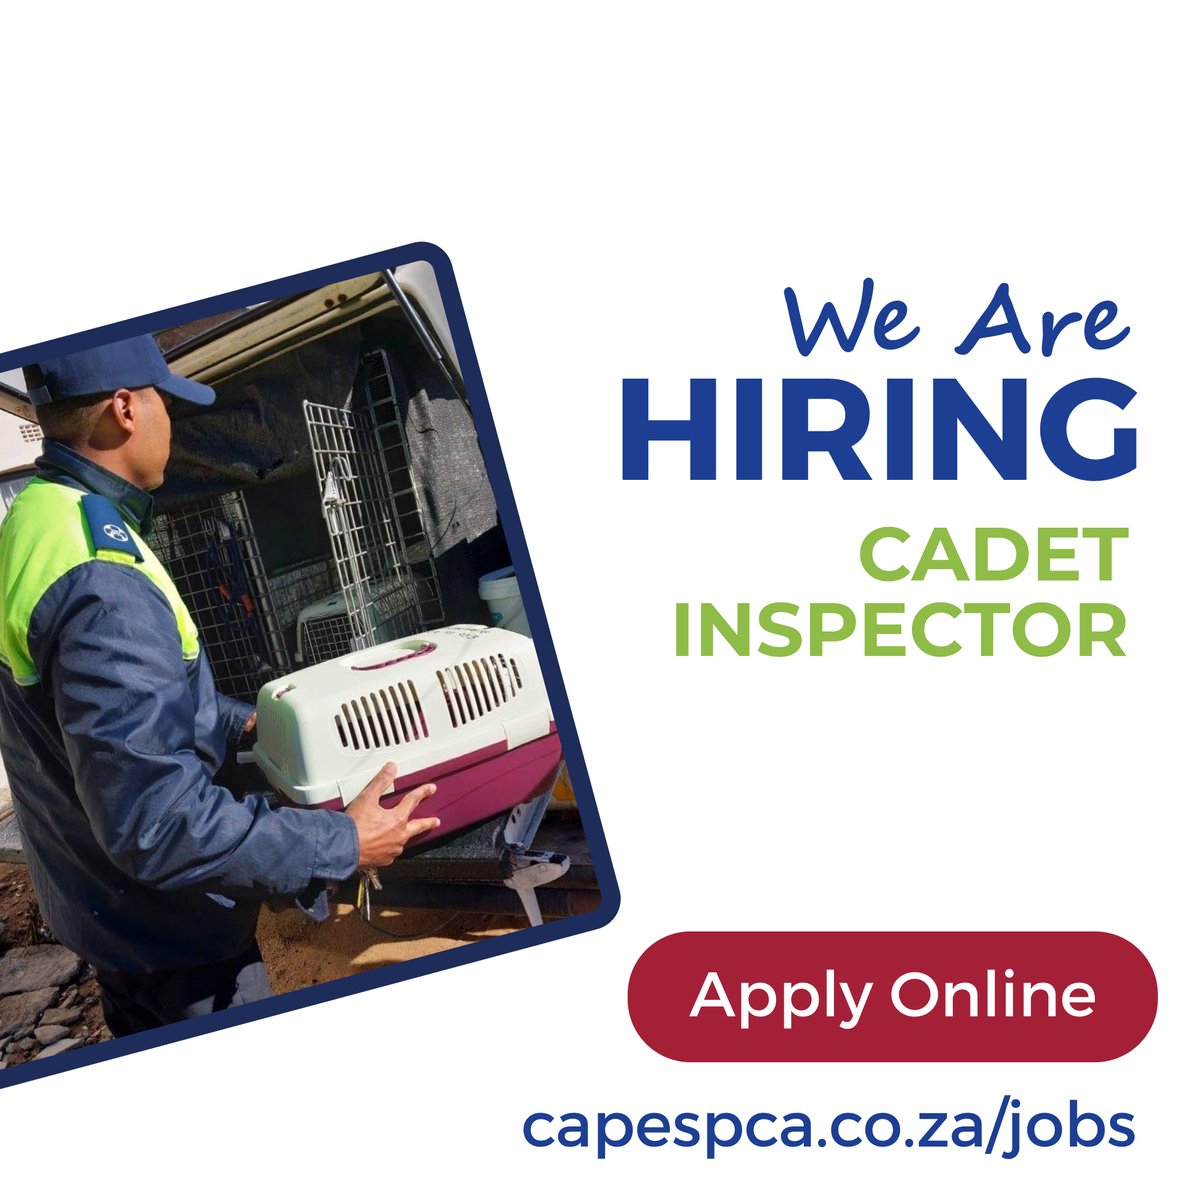 🚨 Join Our Team as a Cadet Inspector at Cape of Good Hope SPCA! 🚨 Follow the LINK IN OUR BIO for the full job description: capespca.co.za/jobs/ #SPCAJobs #CapeSPCAHiring #WeAreHiring #CapeSPCA #MakeADifference #CapeTown #GrassyPark #CadetInspector #AnimalRescue